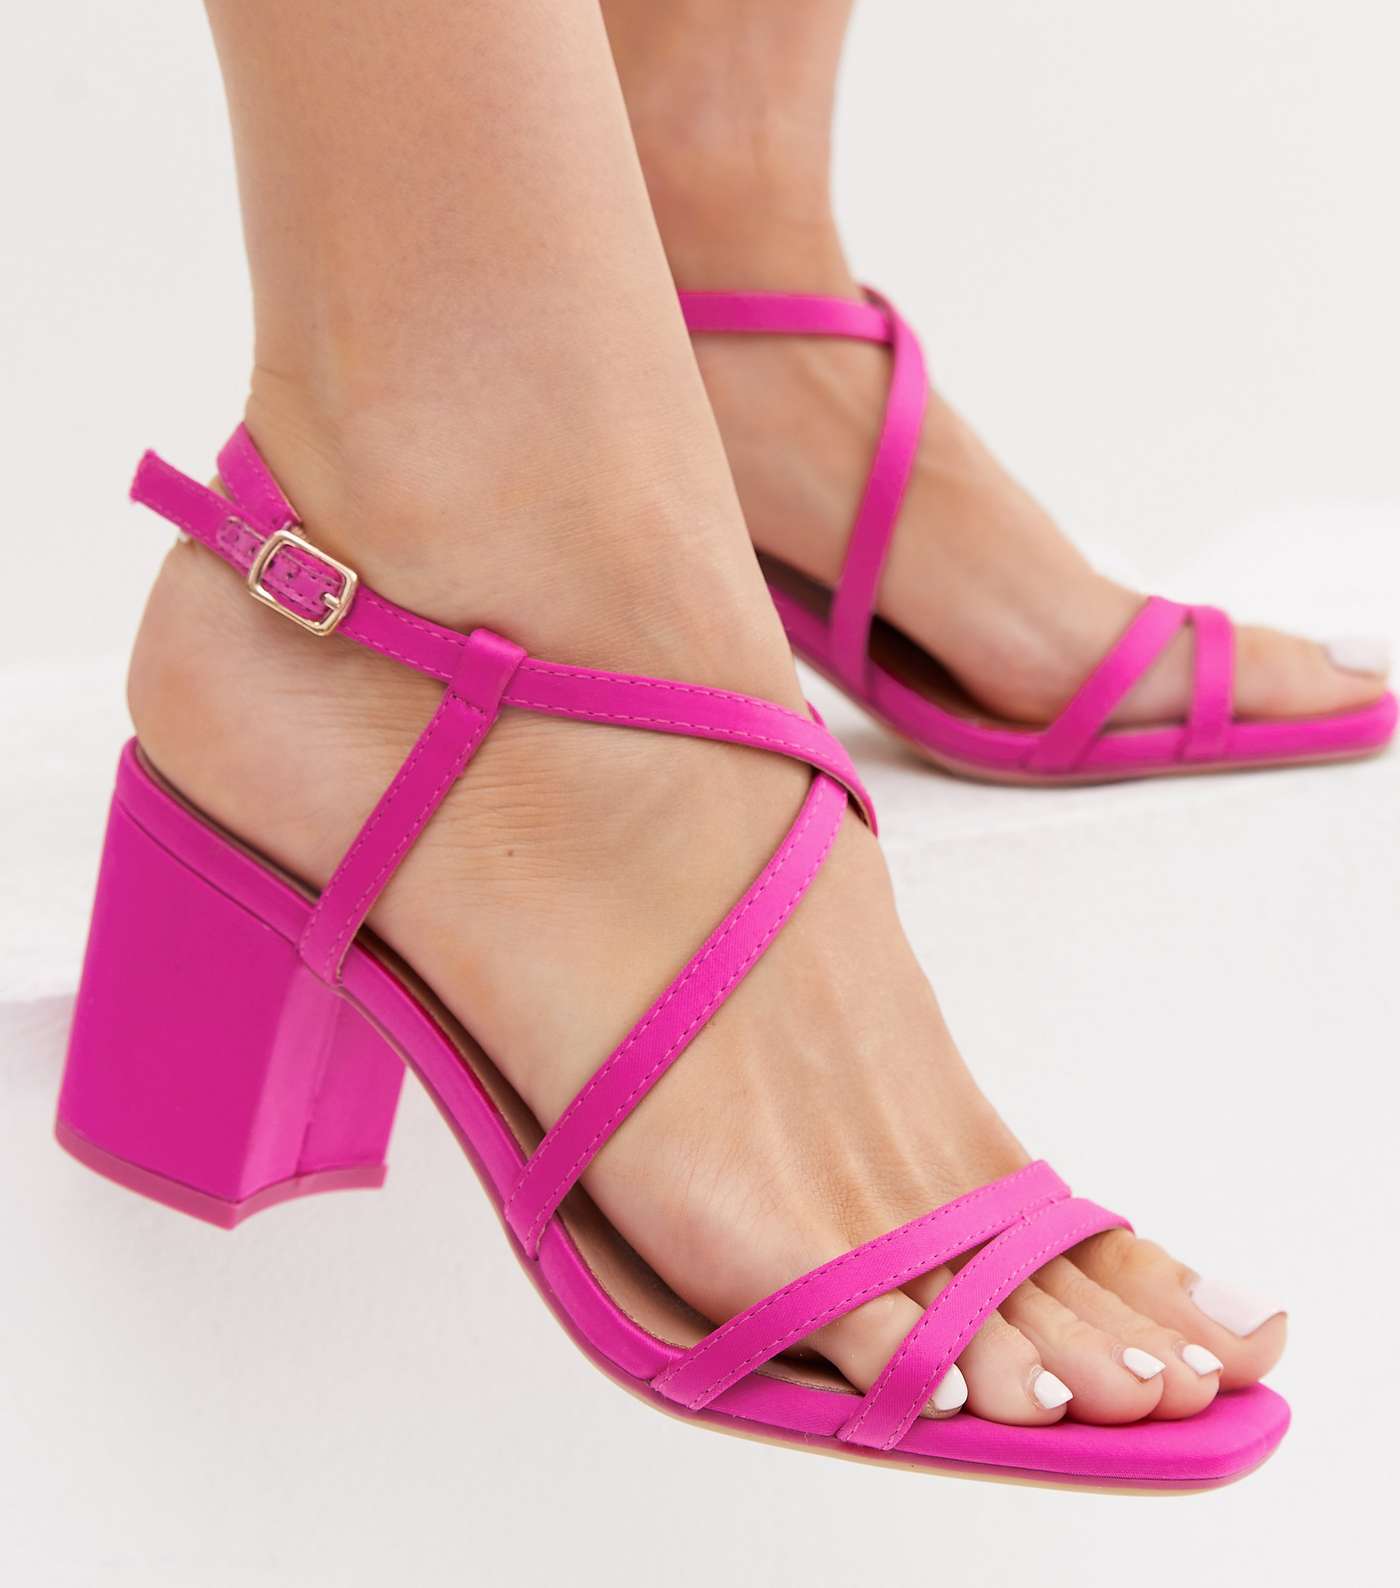 Wide Fit Bright Pink Satin Strappy Block Heel Sandals Image 2